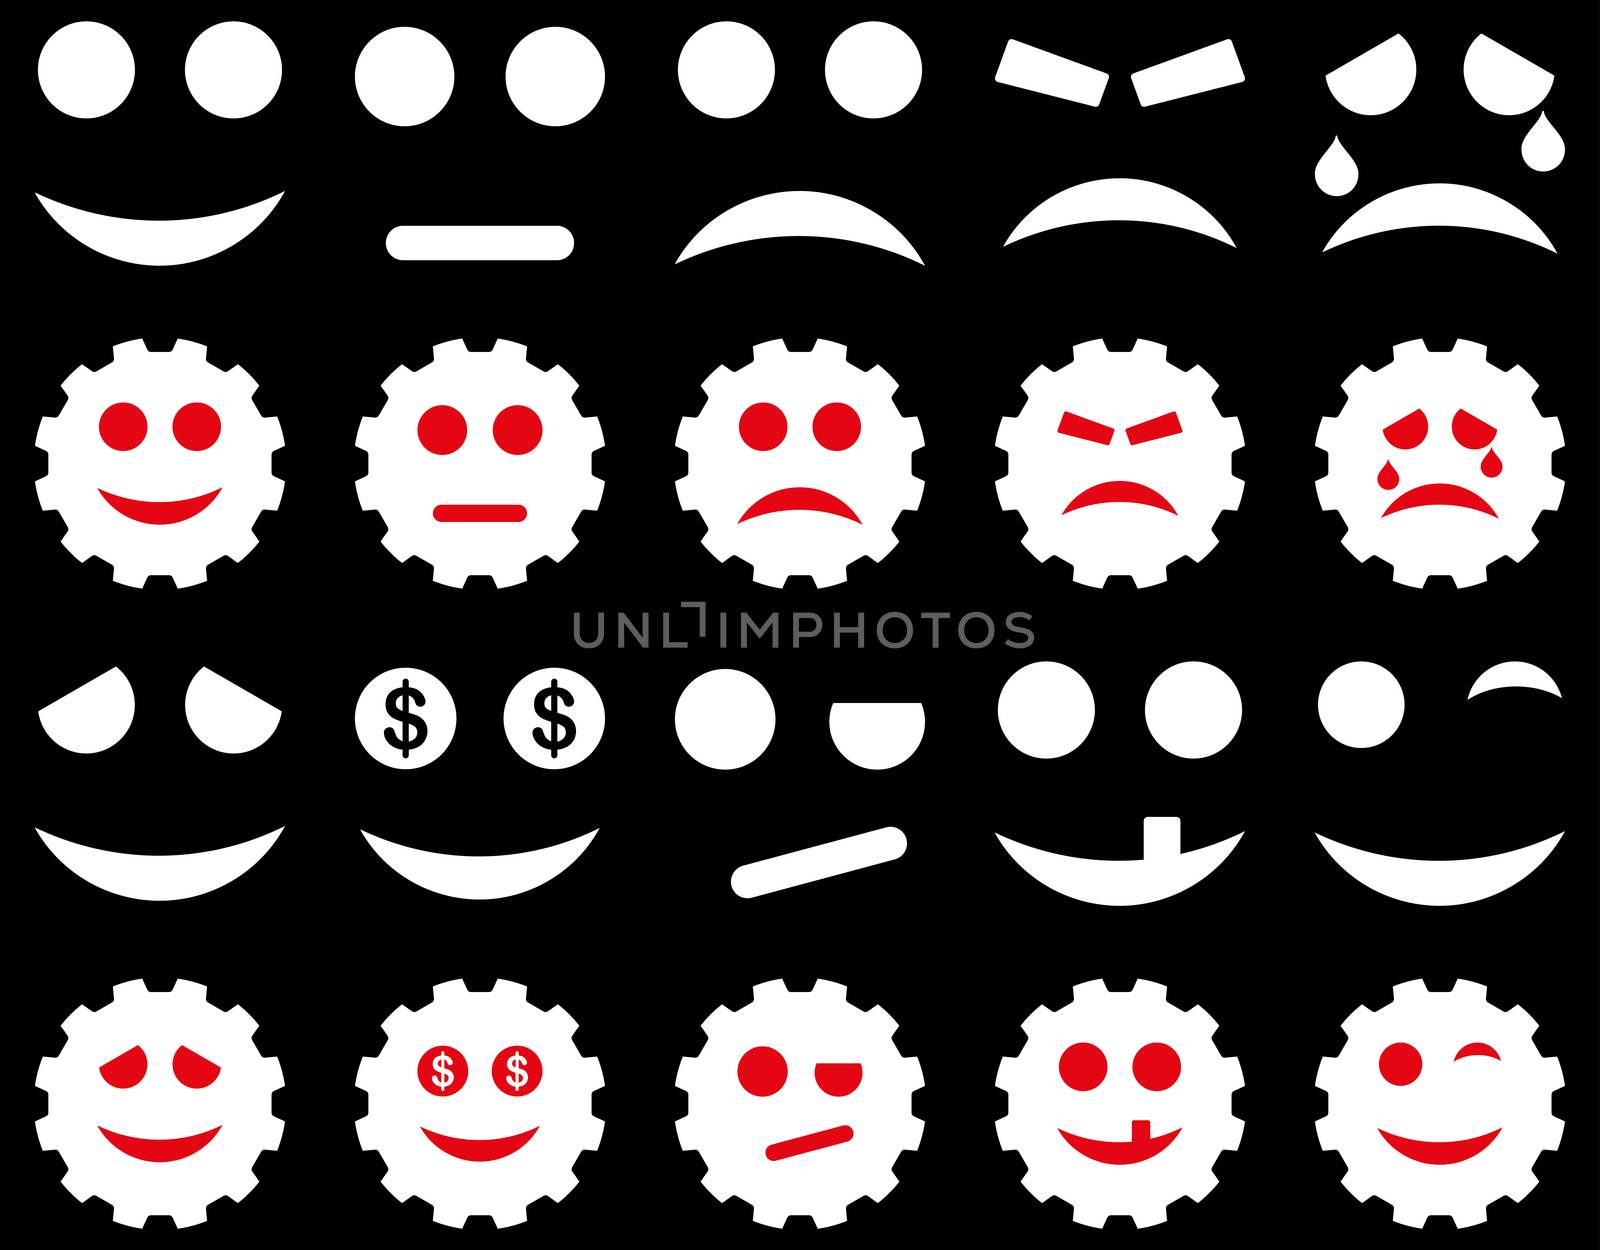 Tools, gears, smiles, emoticons icons. Glyph set style is bicolor flat images, red and white symbols, isolated on a black background.